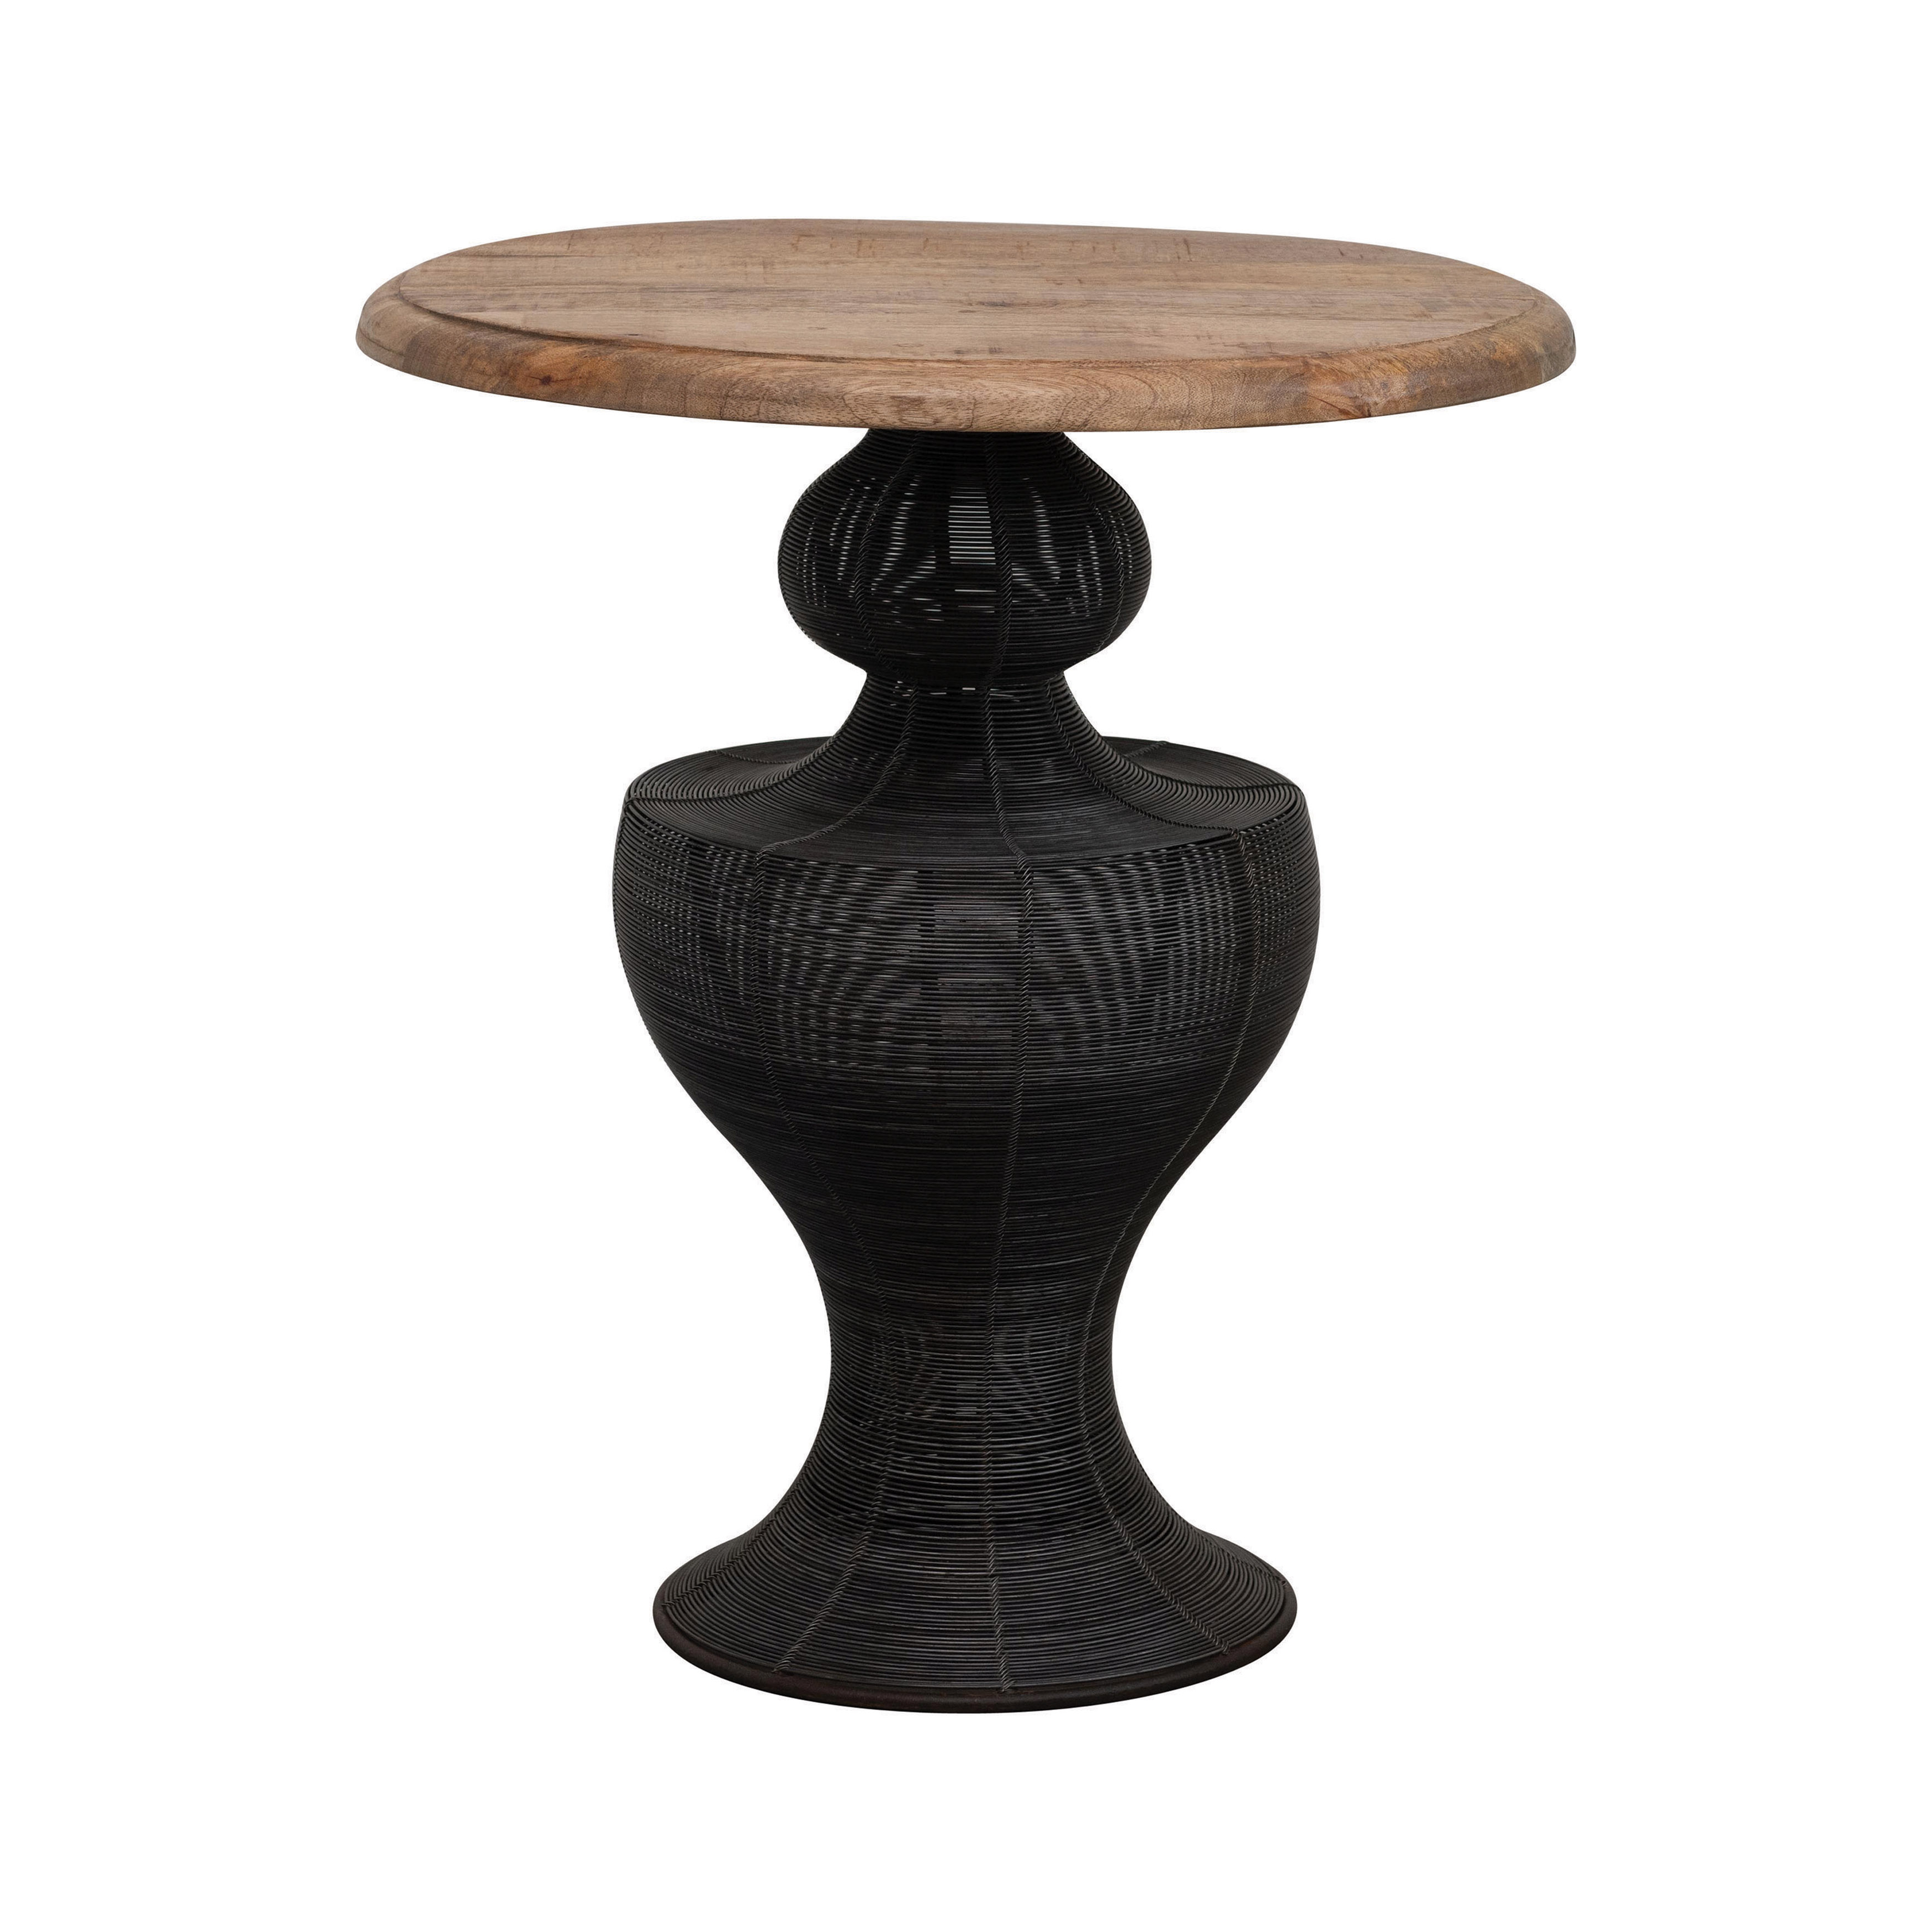 Formed Metal Wire & Mango Wood Table, Natural & Black - Nomad Home